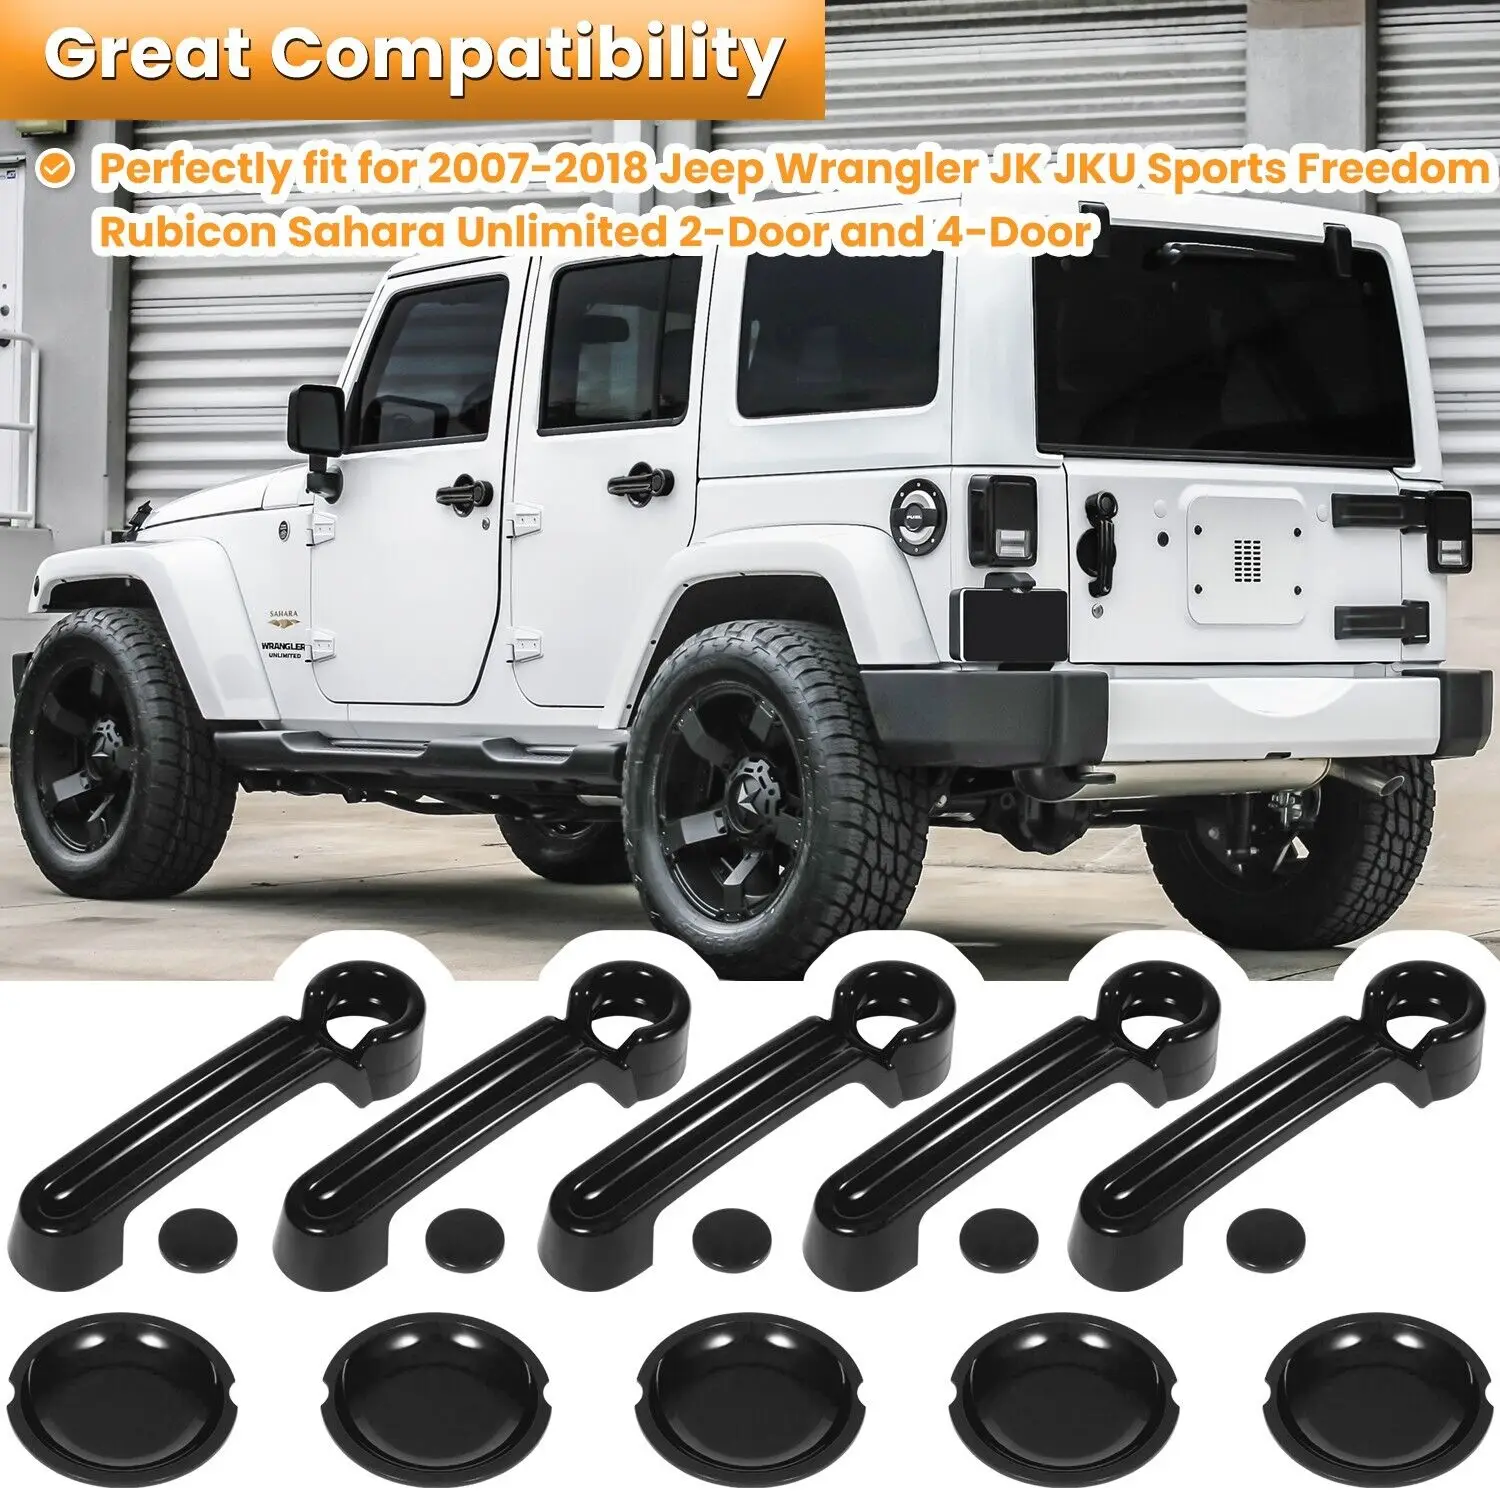 

Side Door handle insert Grab Handle & Push Button Knobs Cover Trim Fit for Jeep Wrangler JK JKU 2007-2018 Accessories ABS